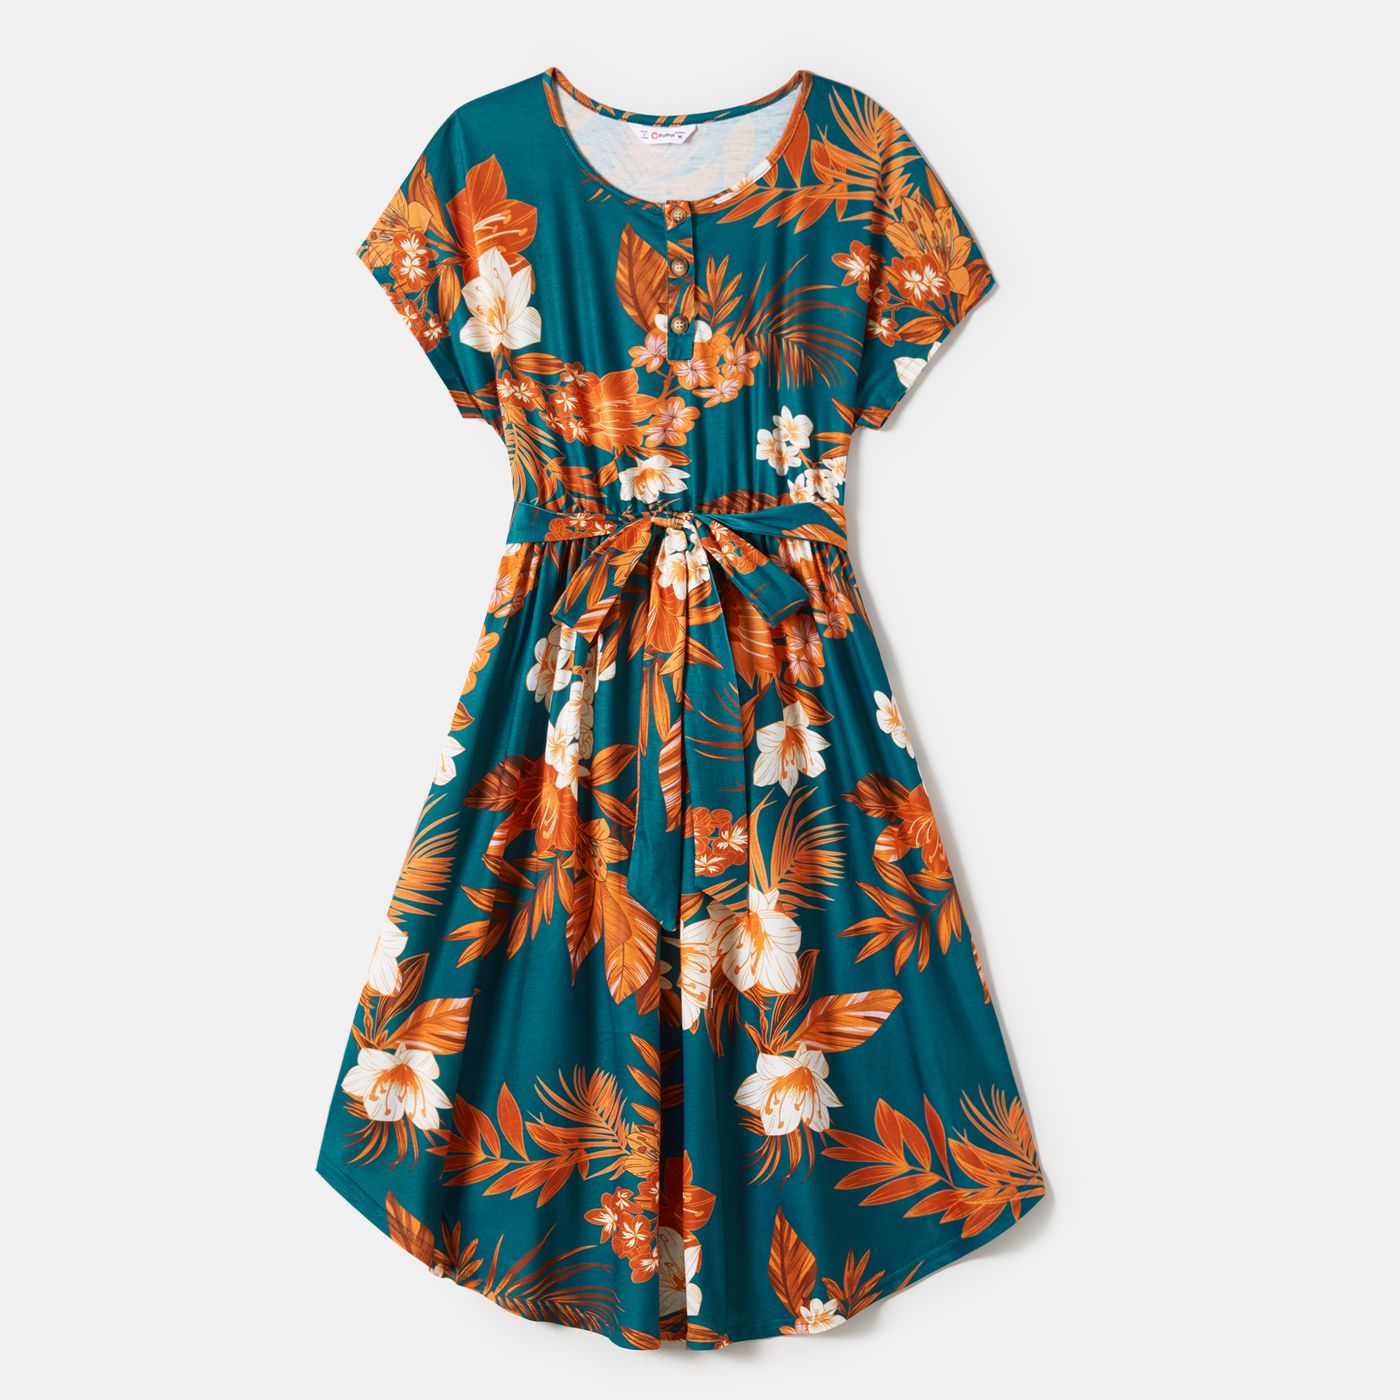 Family Matching Allover Floral Print  Dresses And Short-sleeve Spliced T-shirts Sets